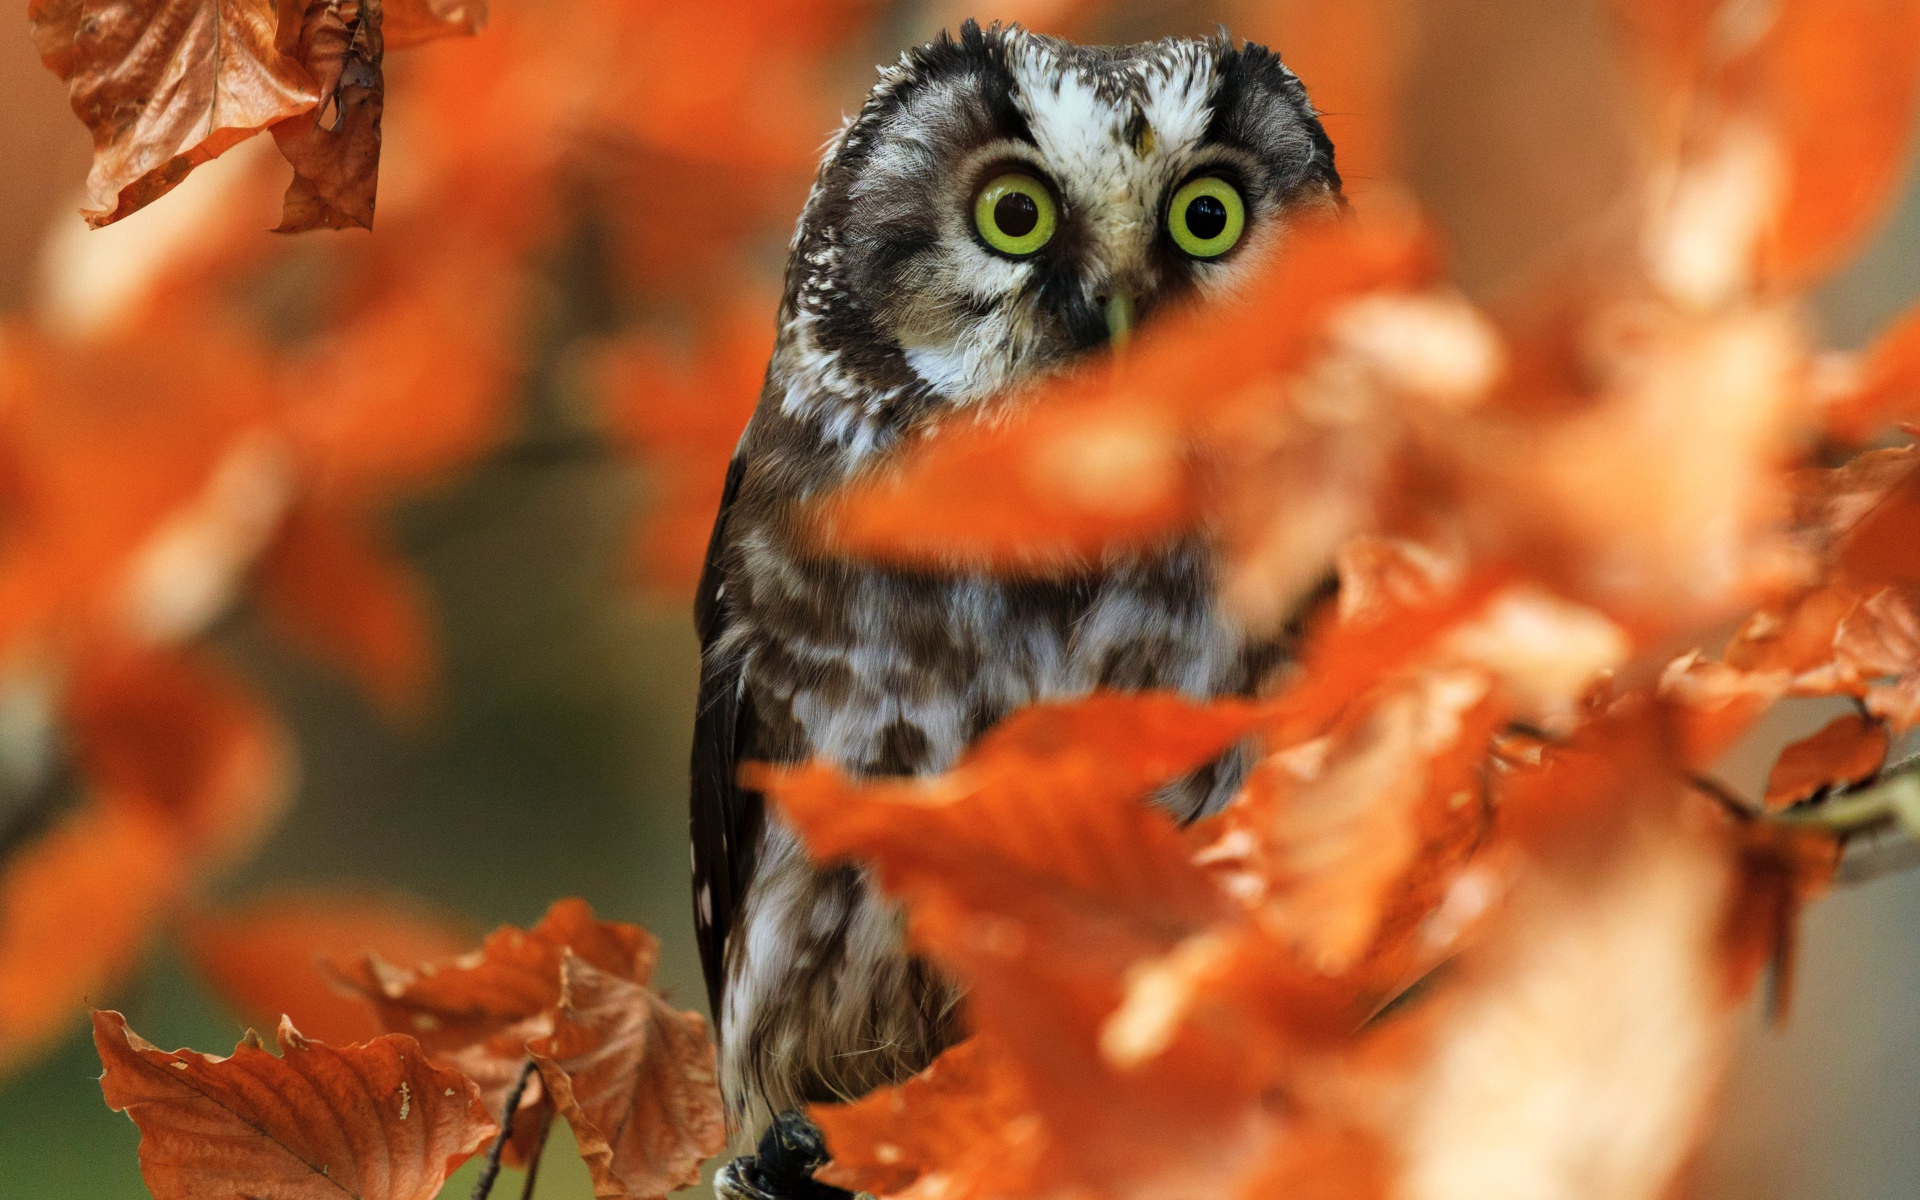 Owl sits on a branch with dry autumn leaves